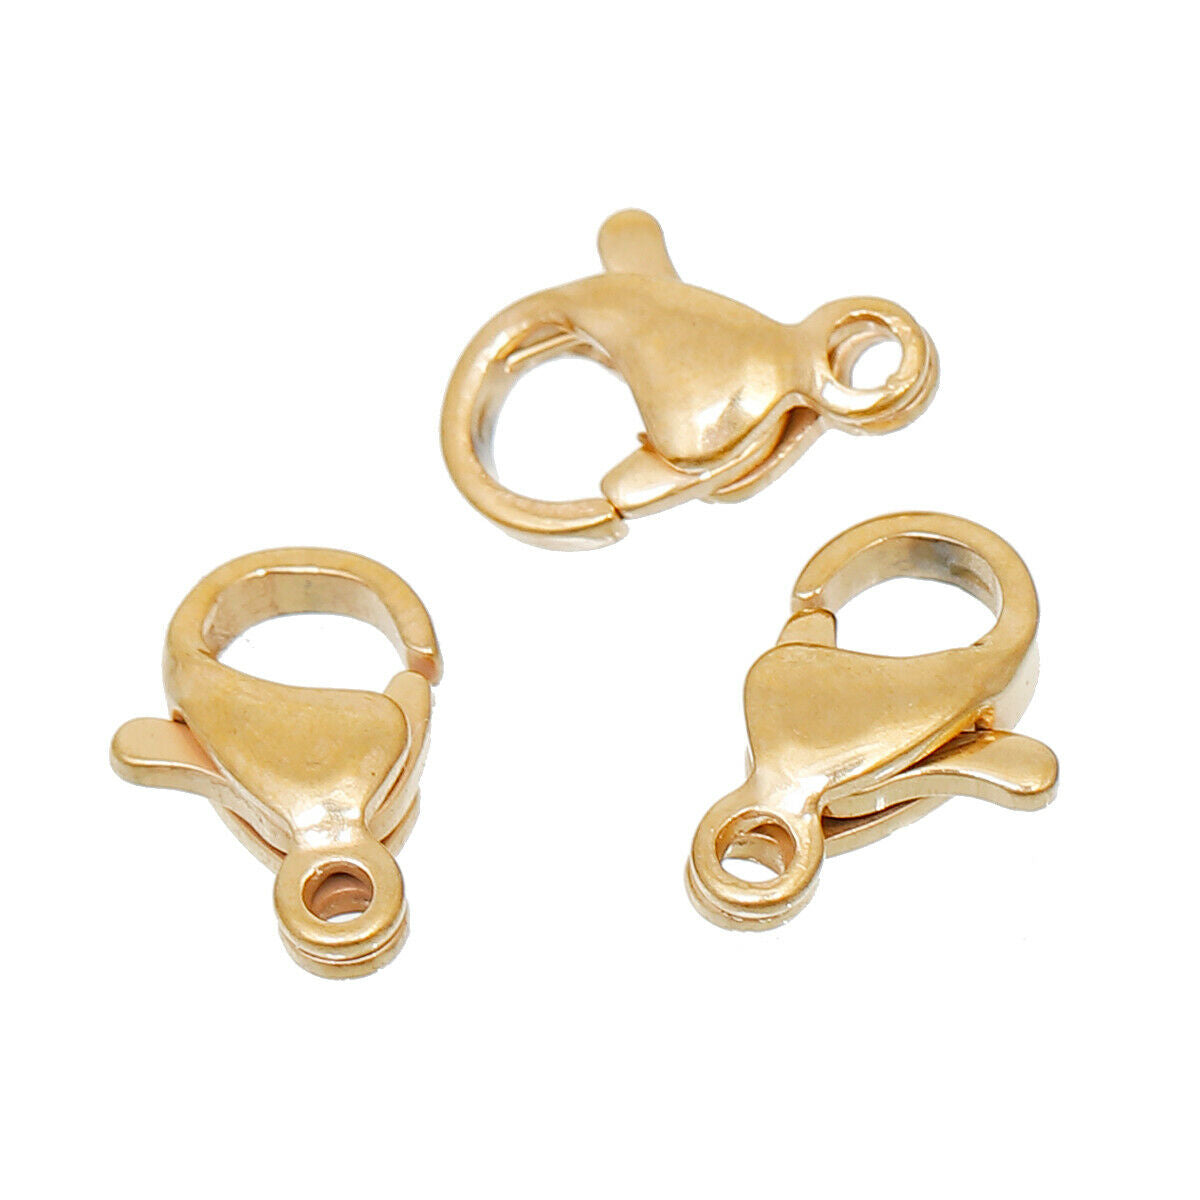 5 Stainless Steel Small Lobster Clasp Findings 18K Gold Plated 10mm x 6mm